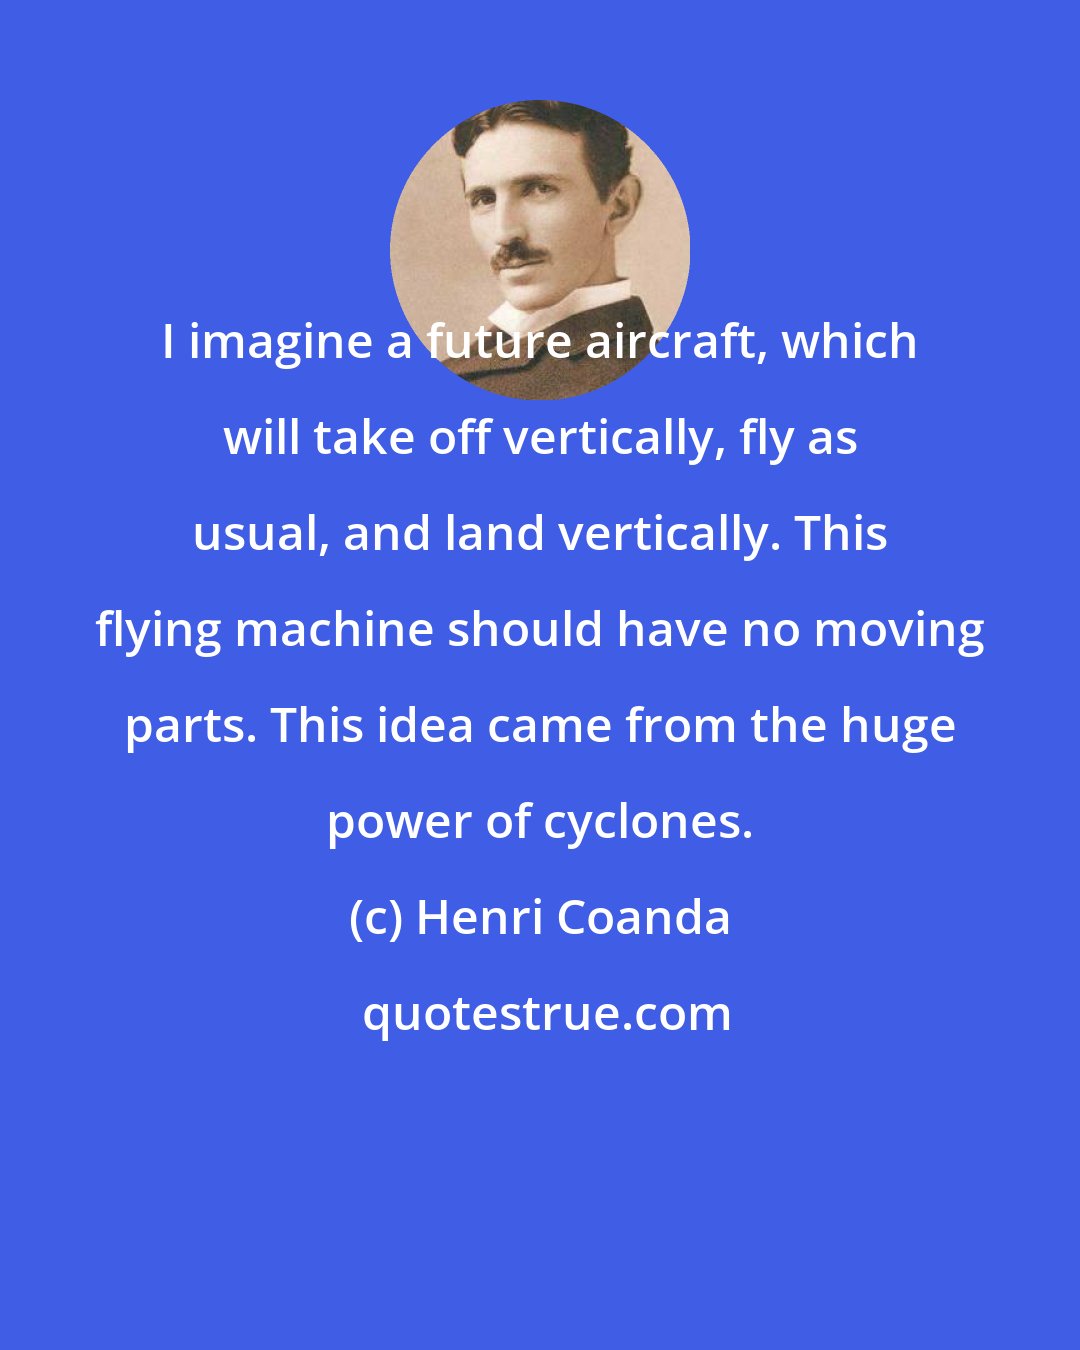 Henri Coanda: I imagine a future aircraft, which will take off vertically, fly as usual, and land vertically. This flying machine should have no moving parts. This idea came from the huge power of cyclones.